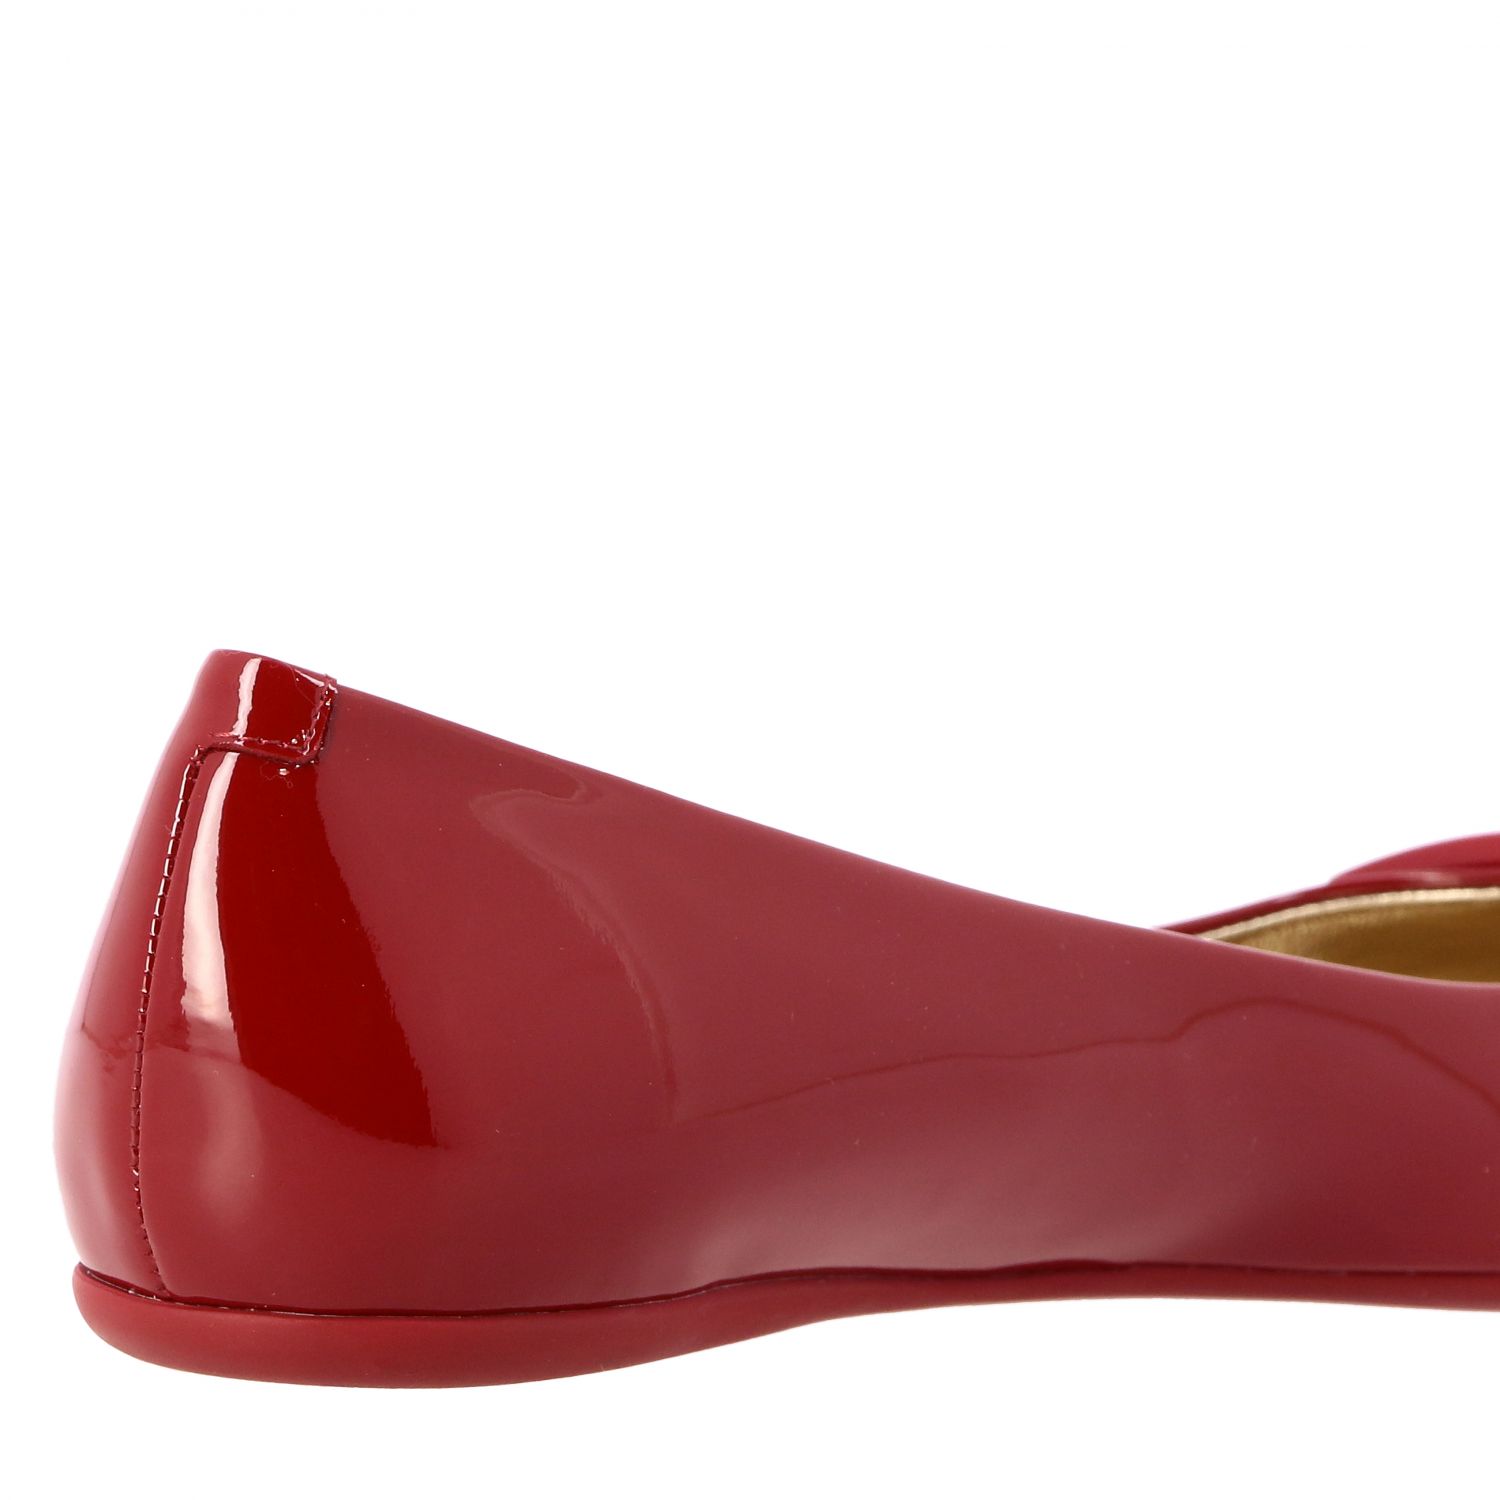 roger vivier red shoes